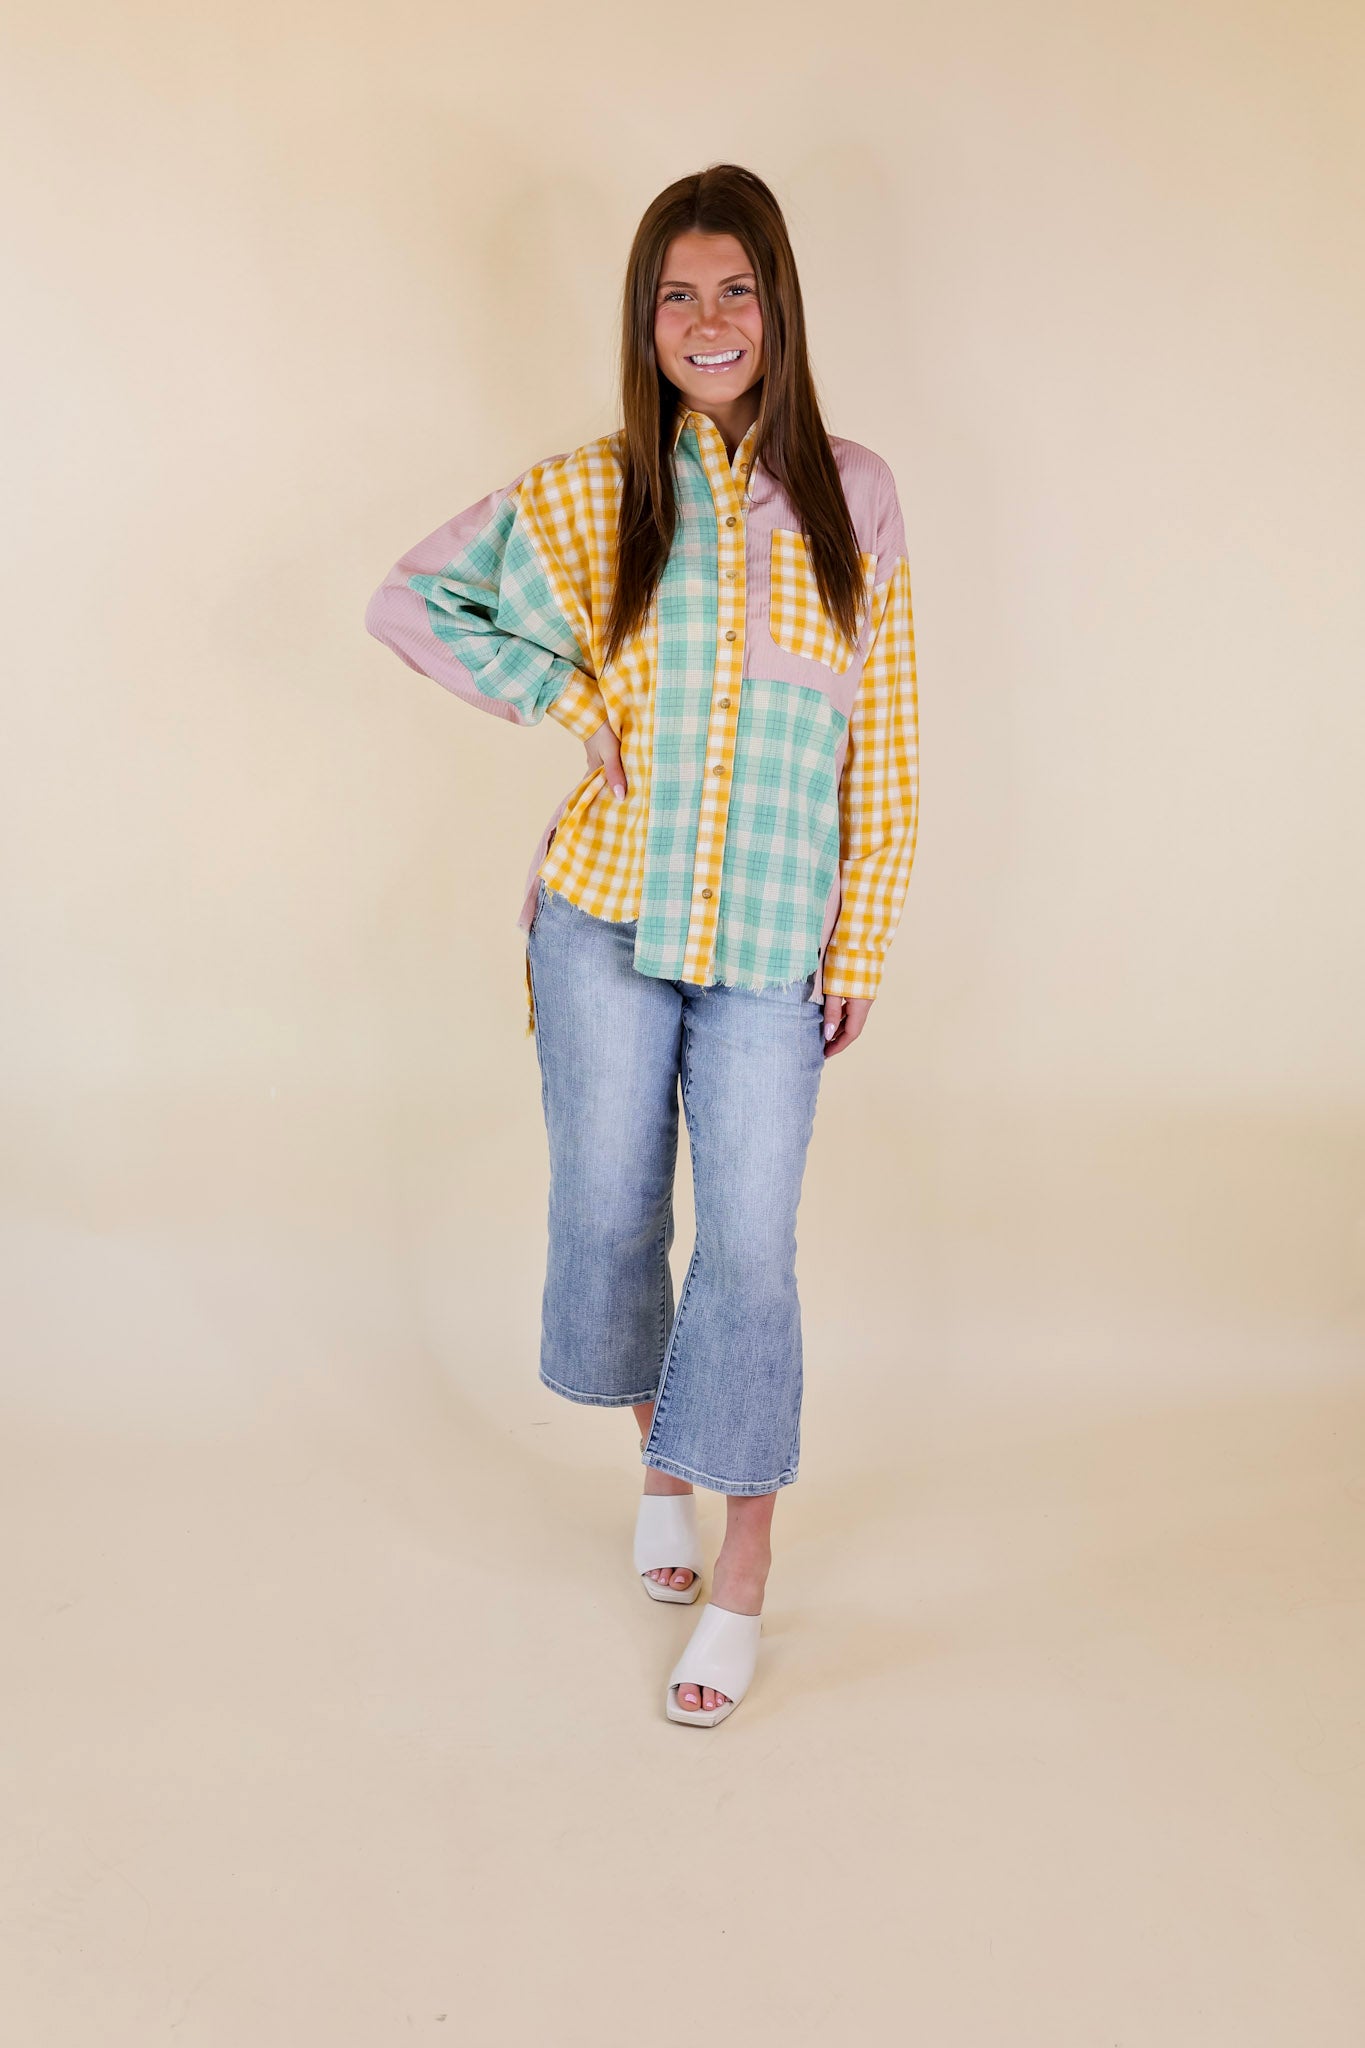 Sandy Shore Plaid Print Block Button Up Top with Raw Hem in Mustard Yellow Mix - Giddy Up Glamour Boutique